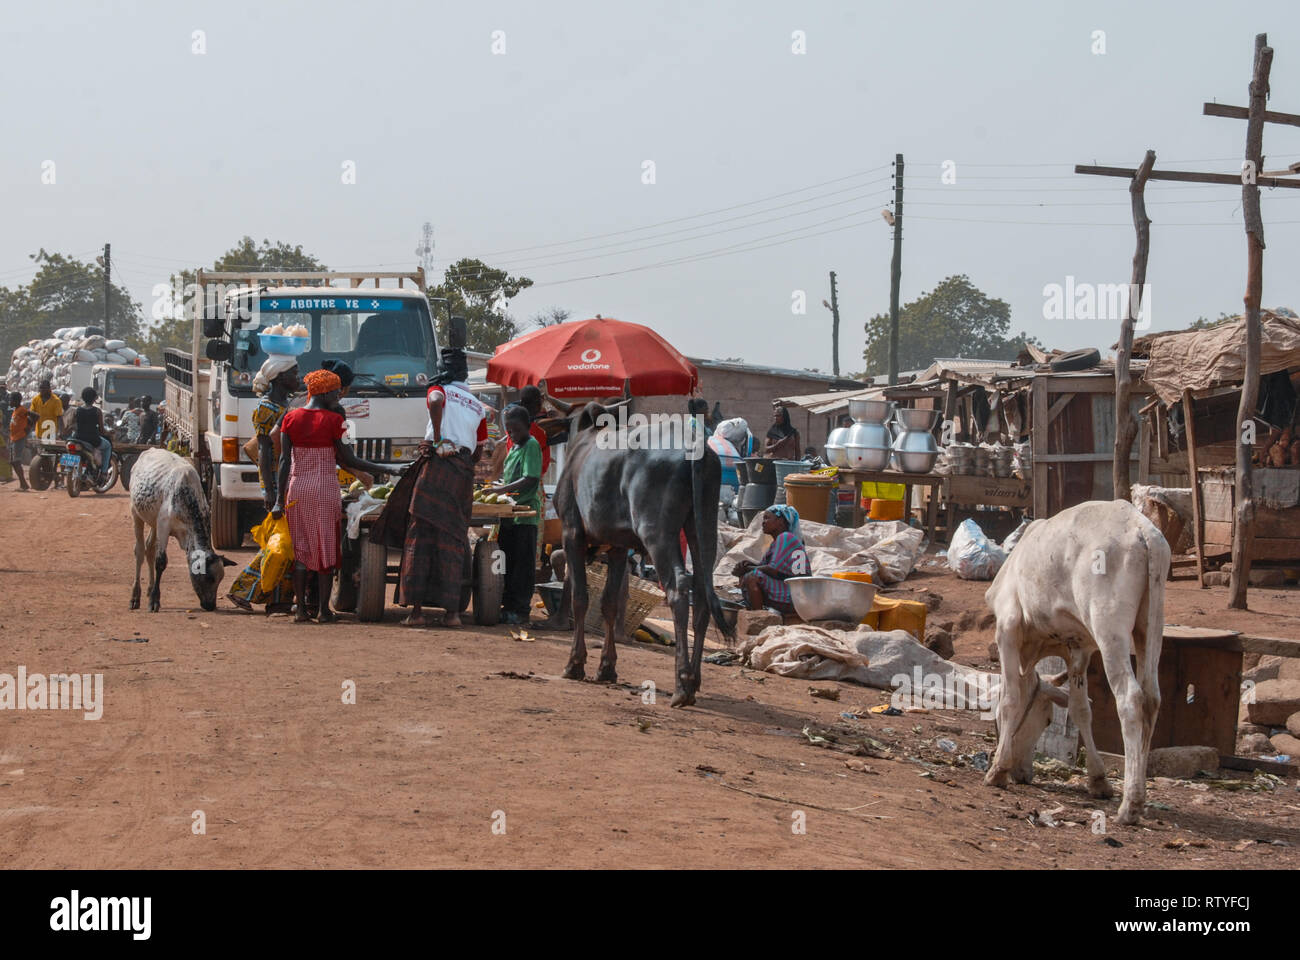 A photo of vendor selling various goods (including livestock such as horses and donkeys) in Bolgatanga (Bolga, Ghana, West Africa Stock Photo